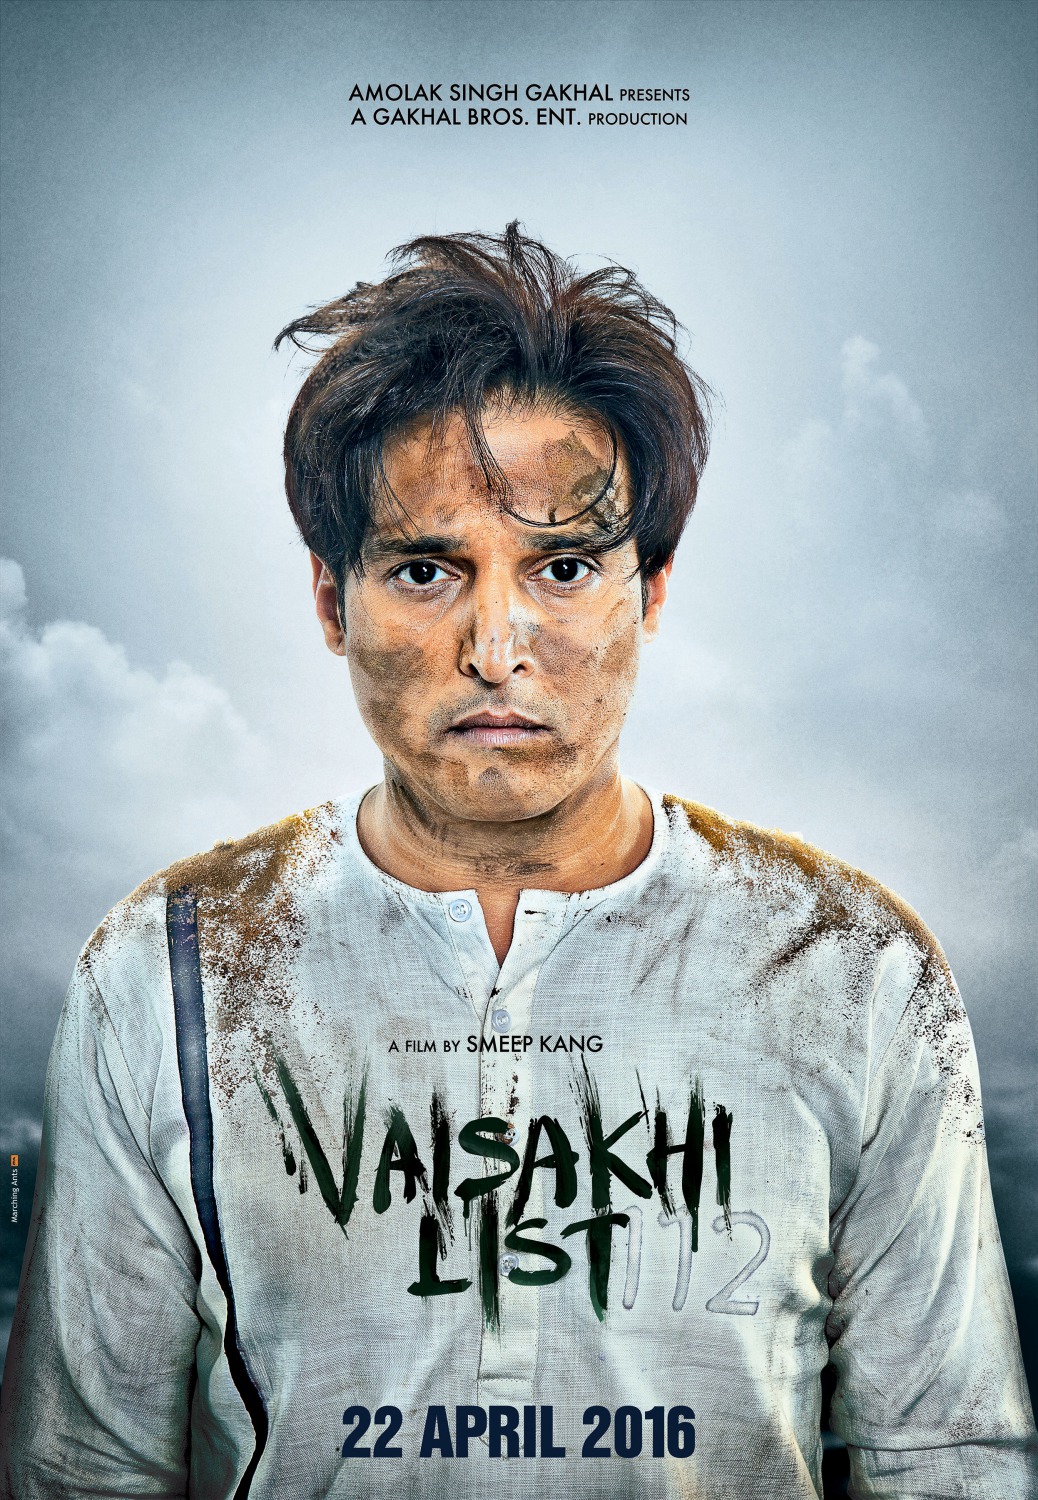 Extra Large Movie Poster Image for Vaisakhi List (#6 of 6)